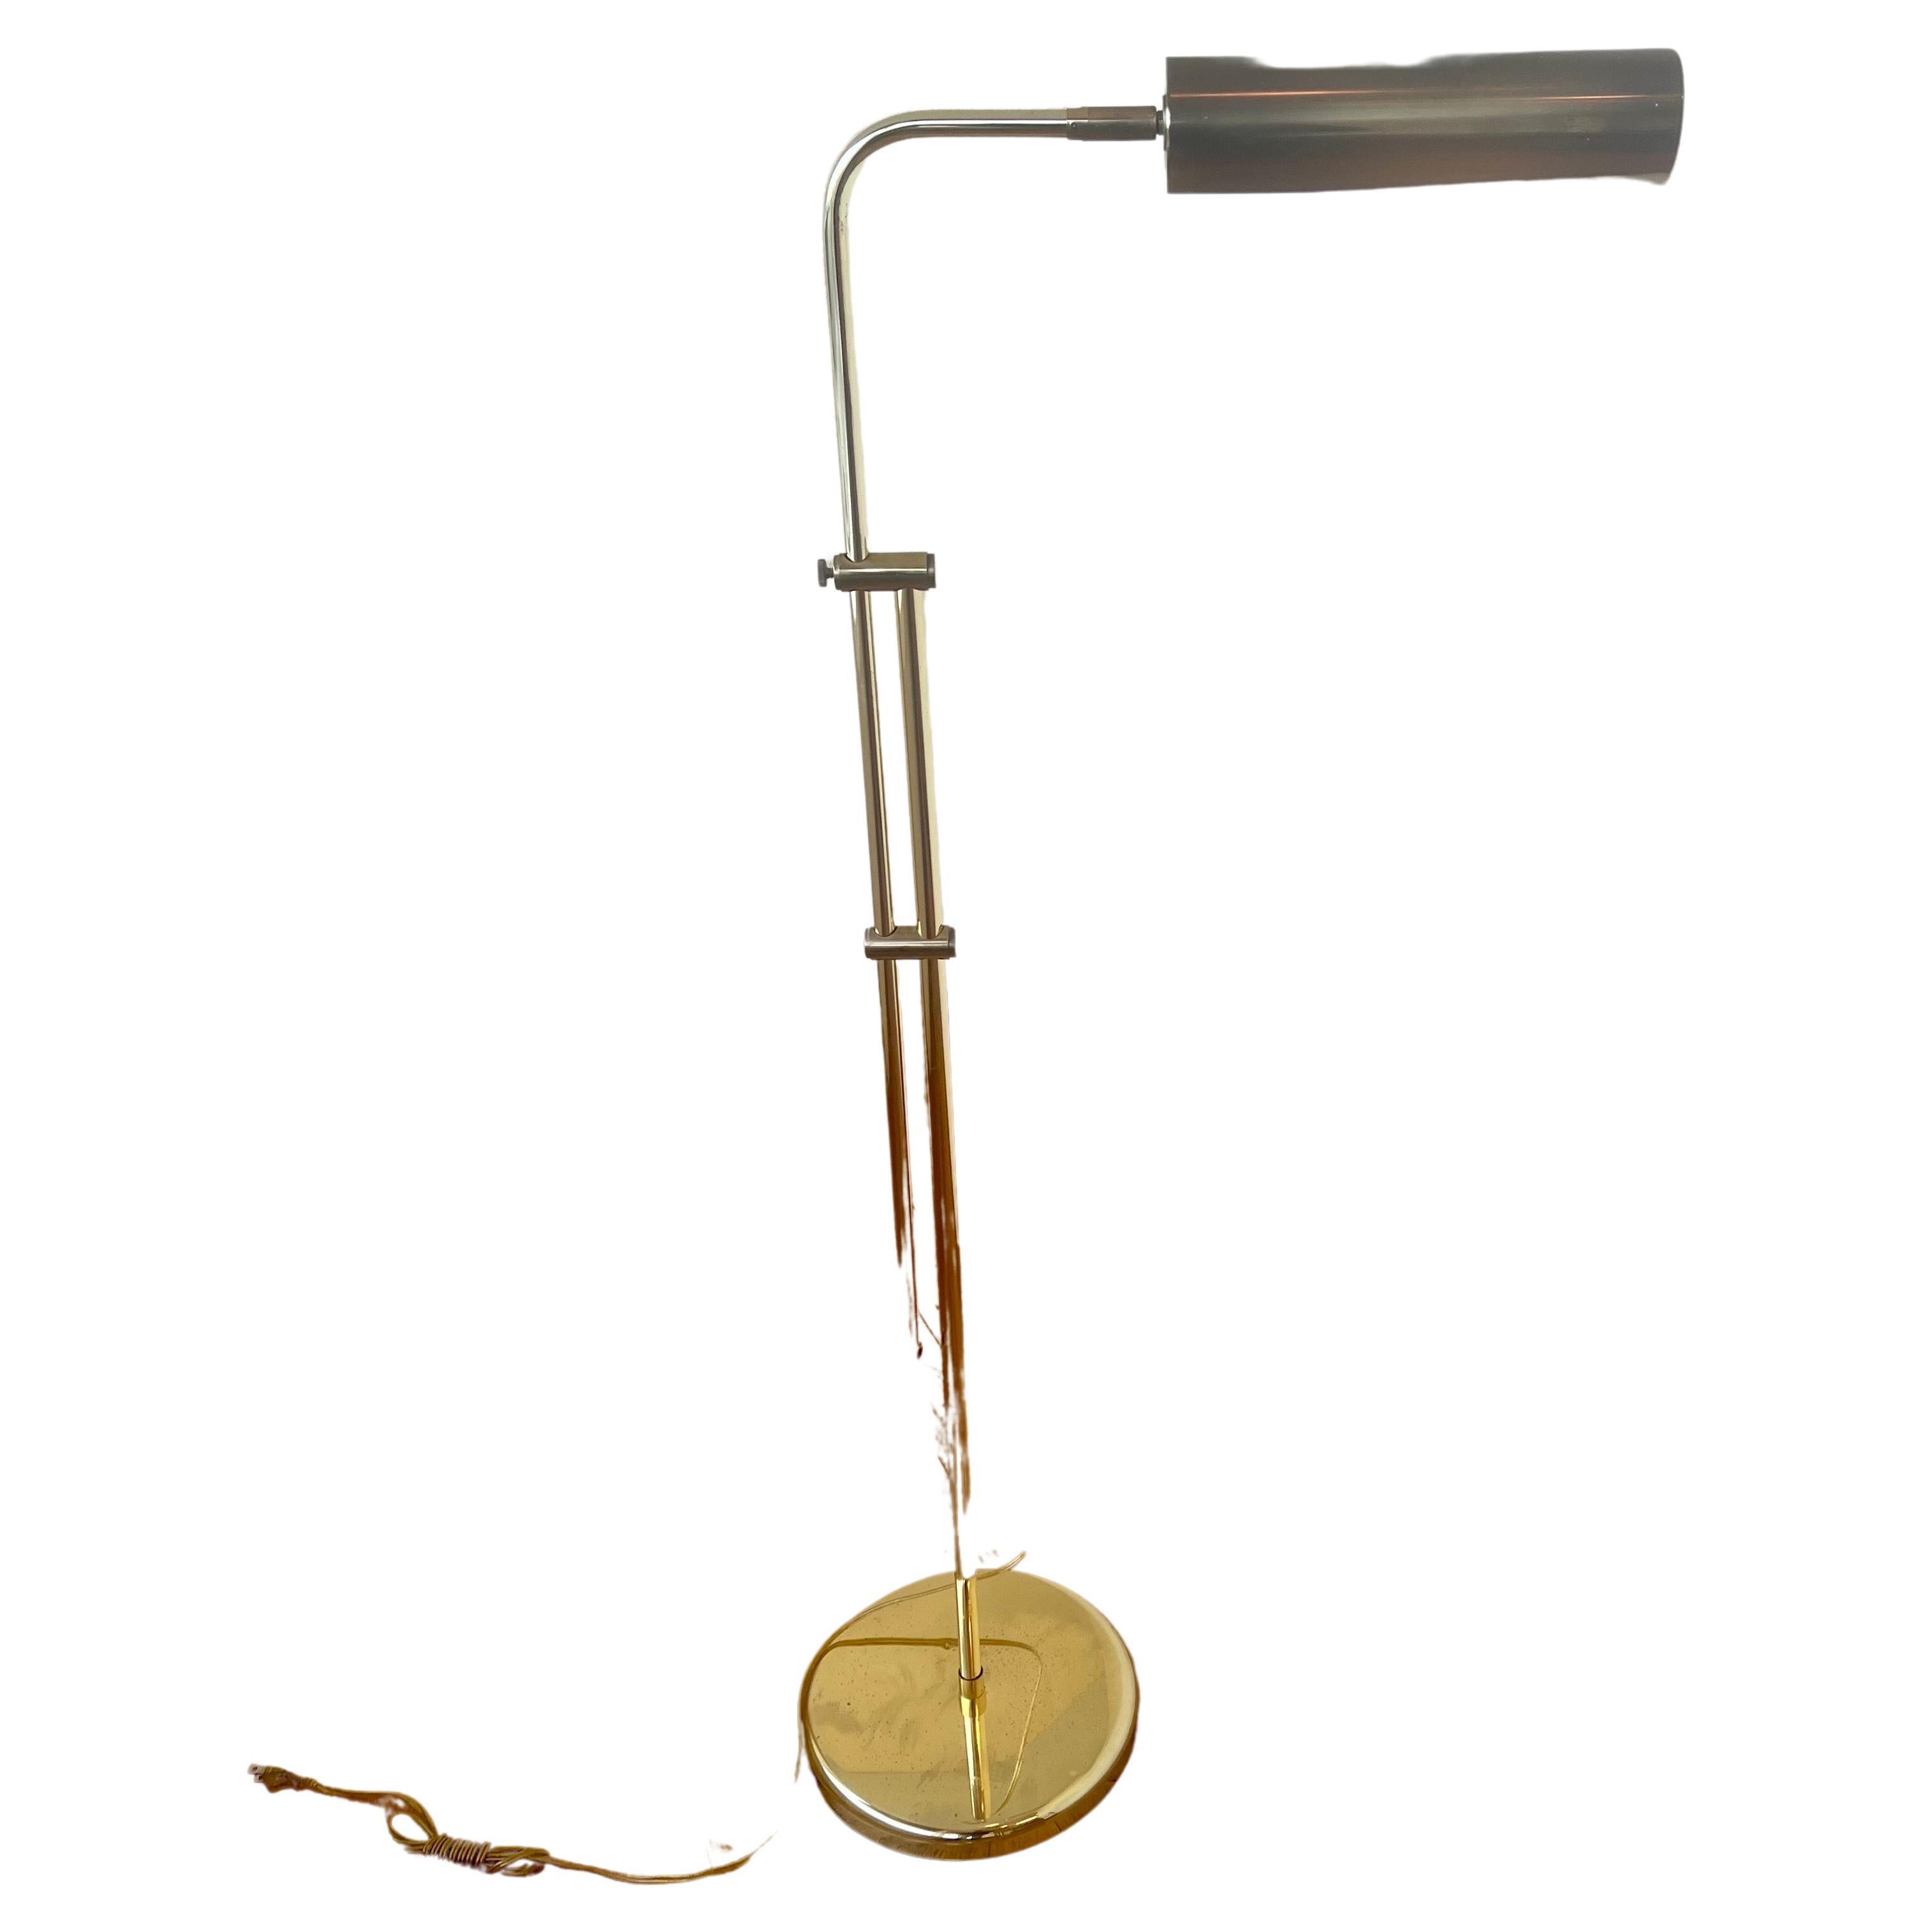 A very nice polished brass multi-directional pharmacy floor lamp we belive its by  Frederick Cooper, circa the 1970s. The lamp is multi-directional (goes up and down and the shade rotates from side to side) and is in good working condition. The lamp